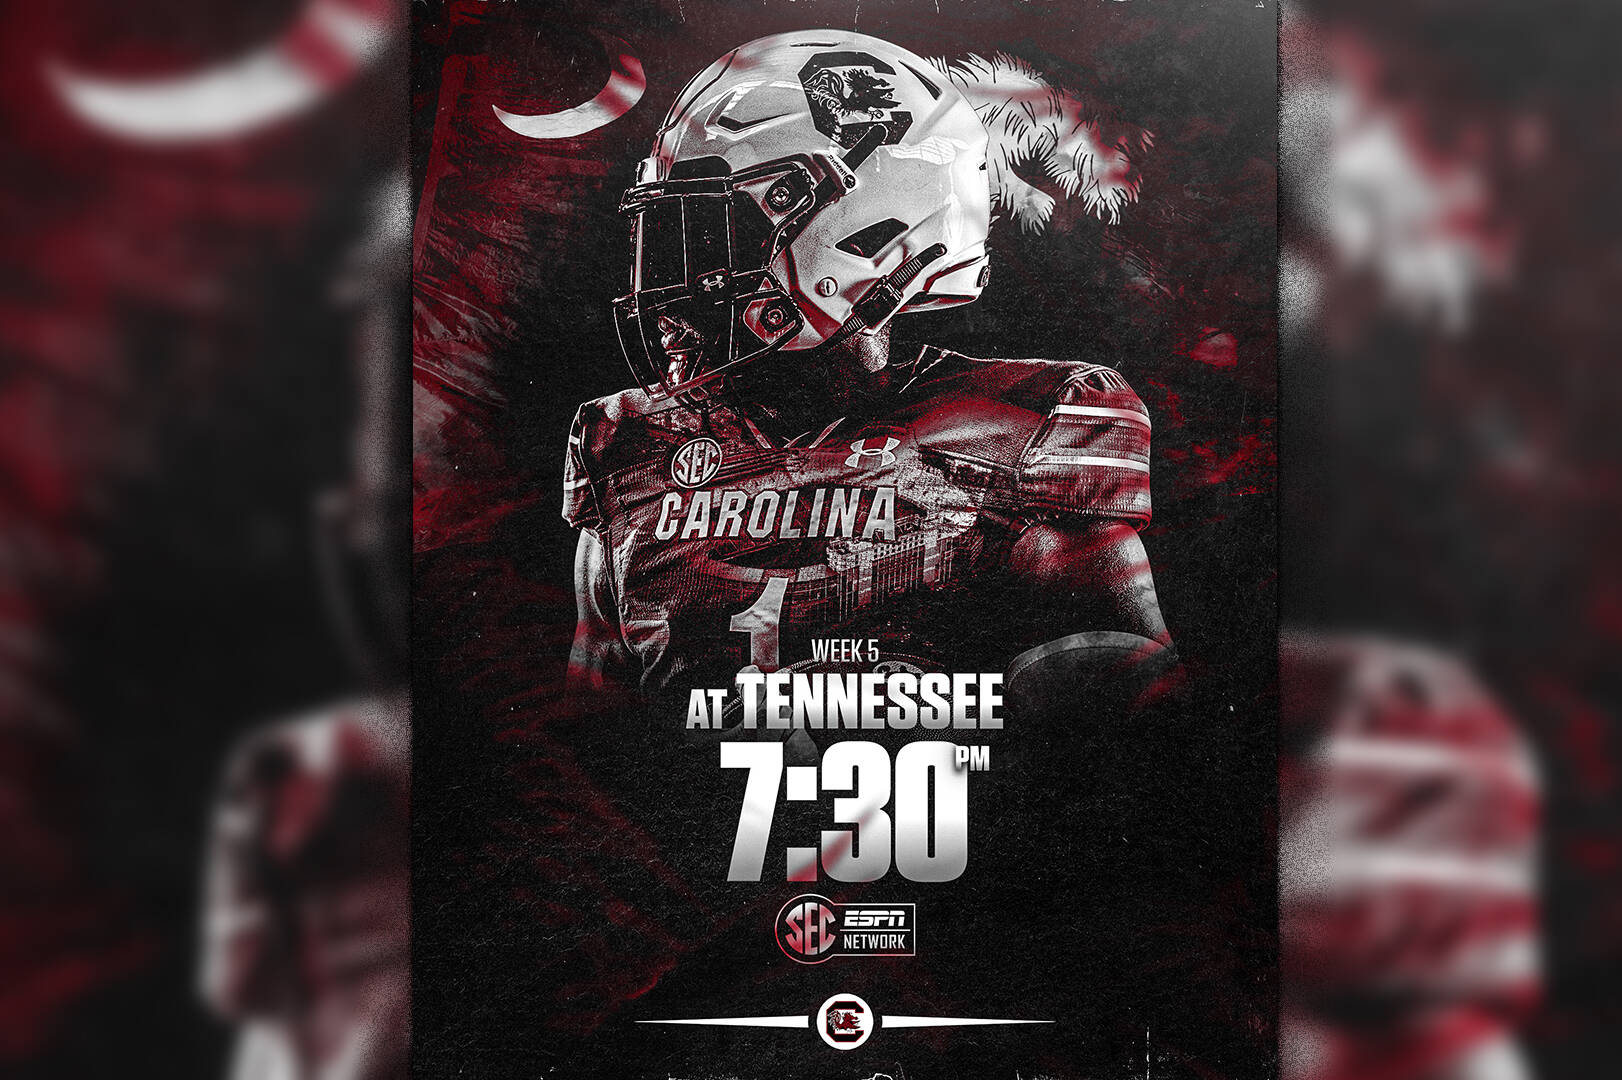 Gamecocks and Vols to Meet Under the Lights in Knoxville